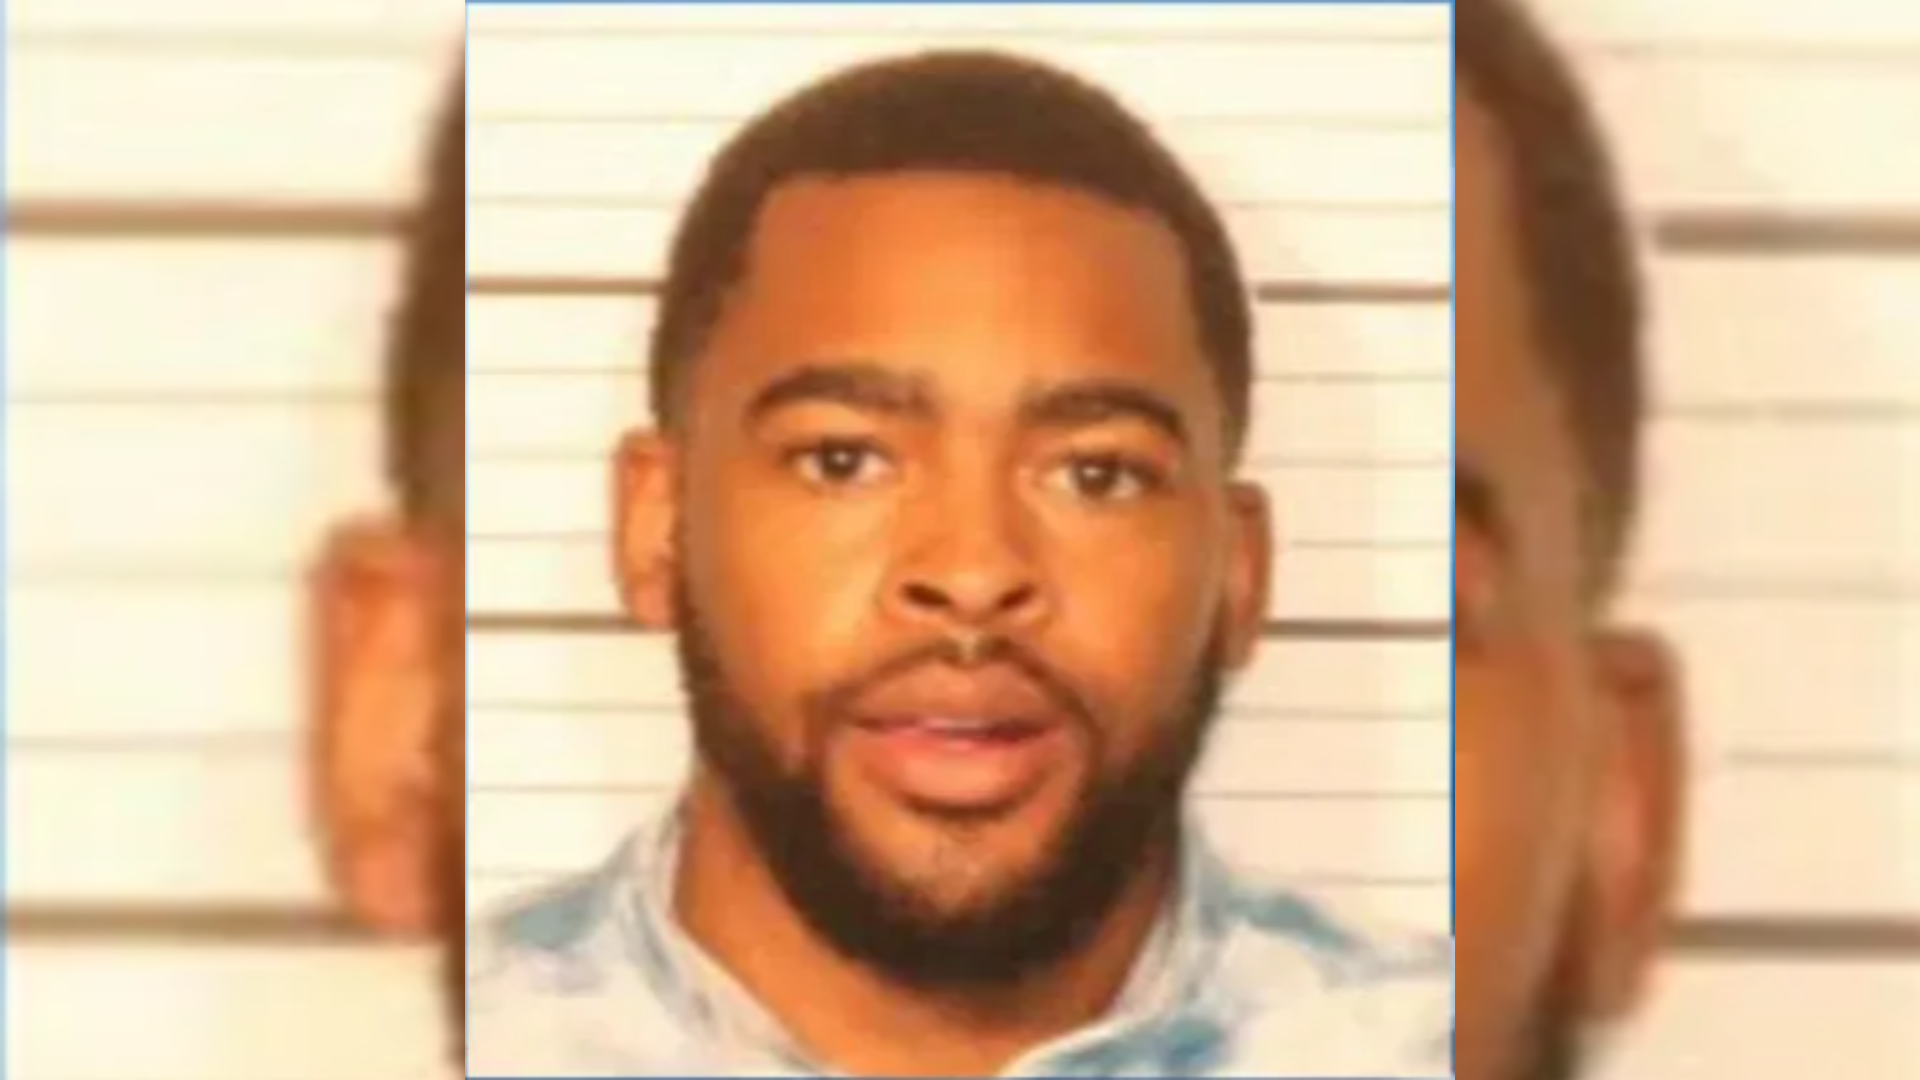 Man who was person of interest in Young Dolphs murder shot to death, sources say News fox13memphis image